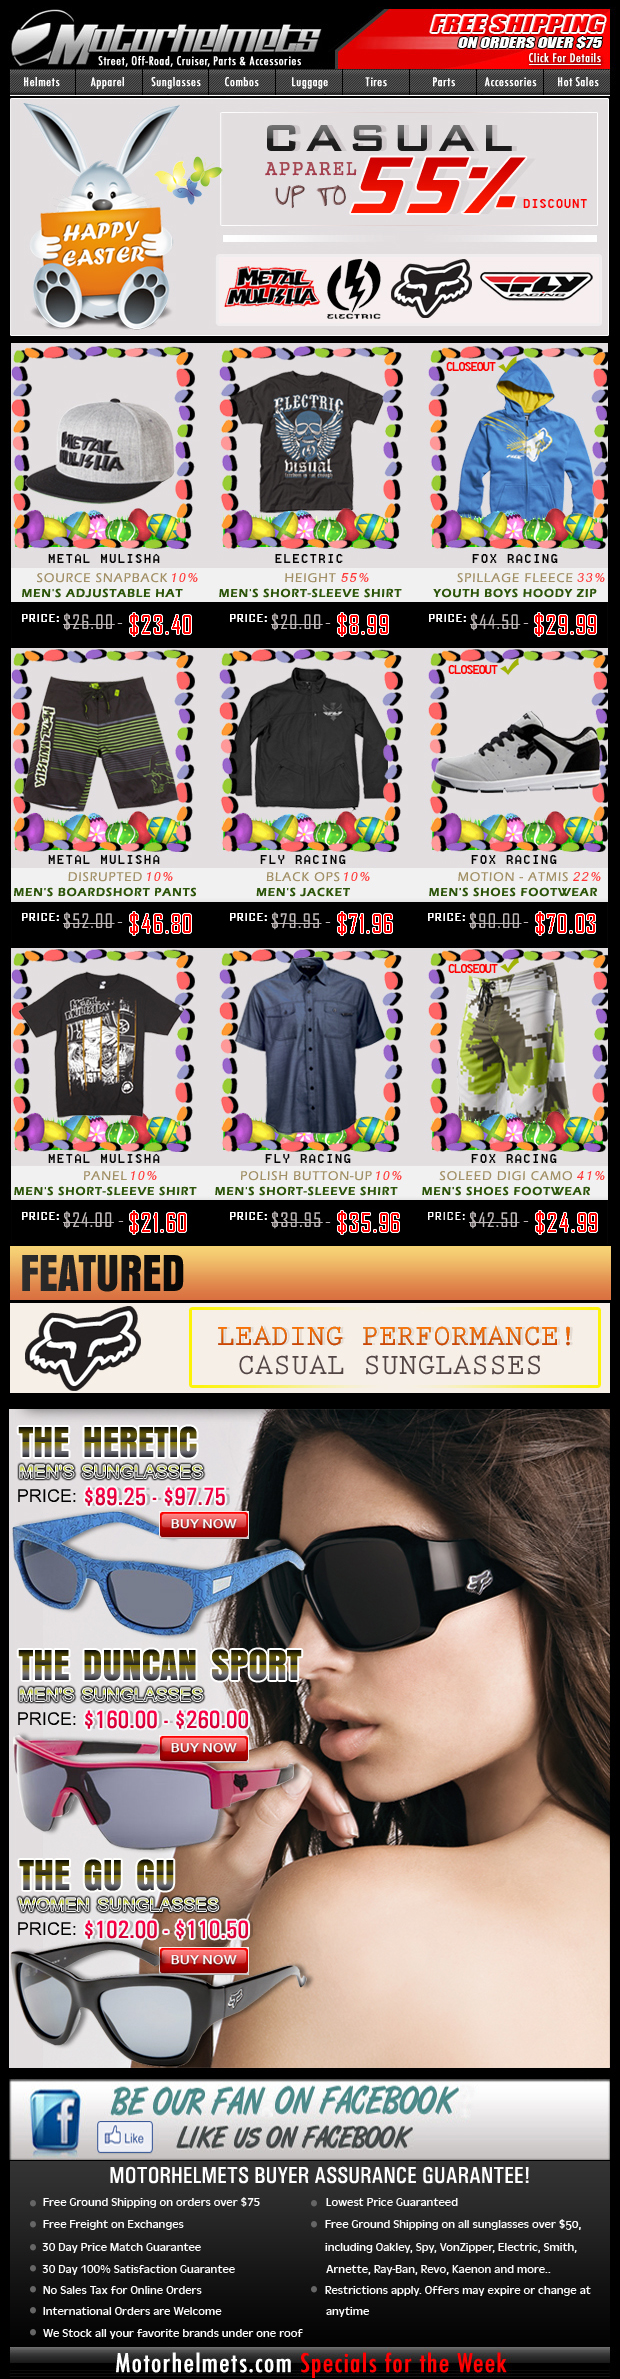 Easter Specials...save up to 55% off on Fox, Fly, Electric and Metal Mulisha Casuals!